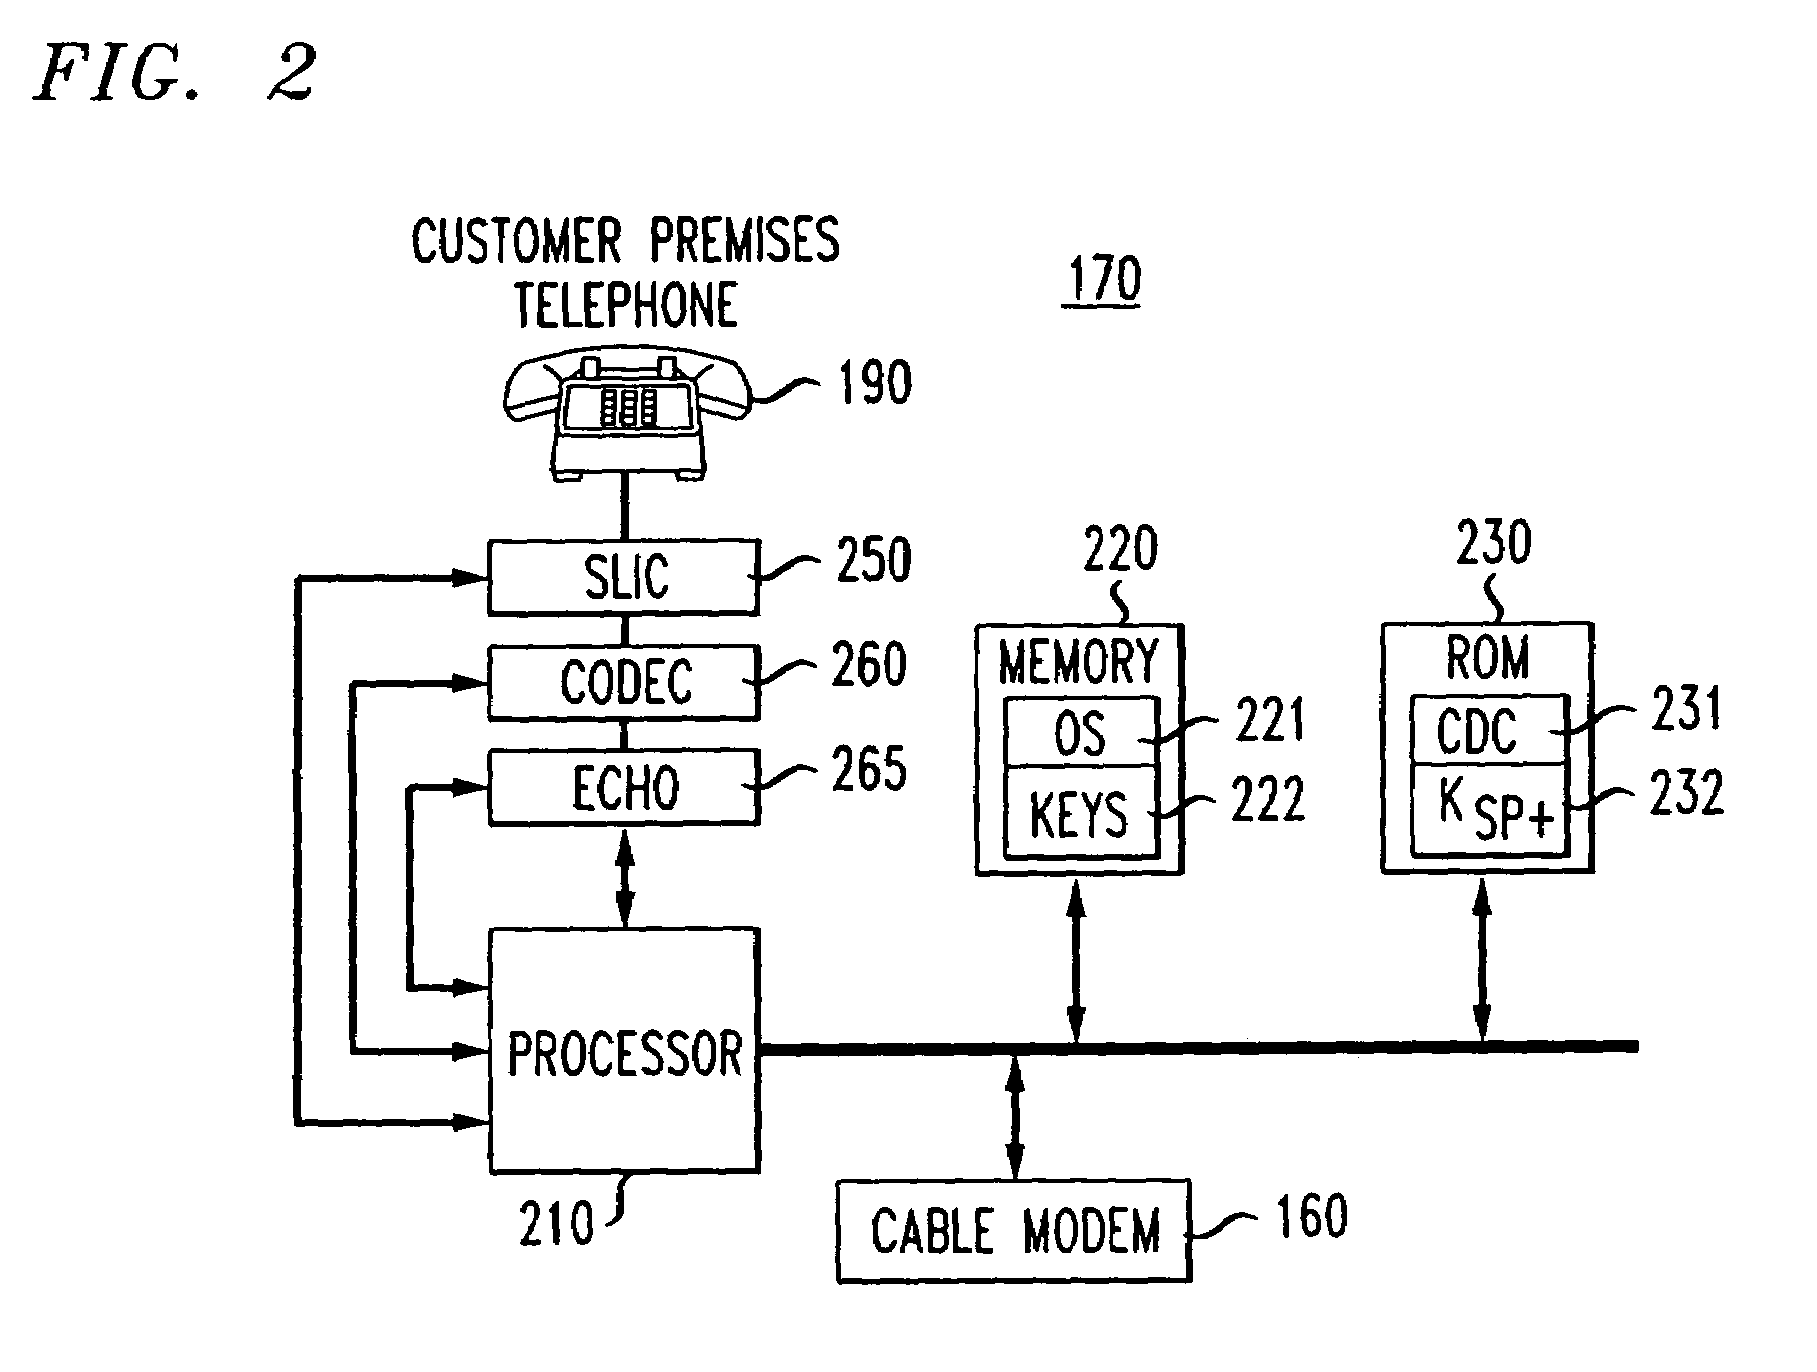 Method and apparatus for enhanced security in a broadband telephony network